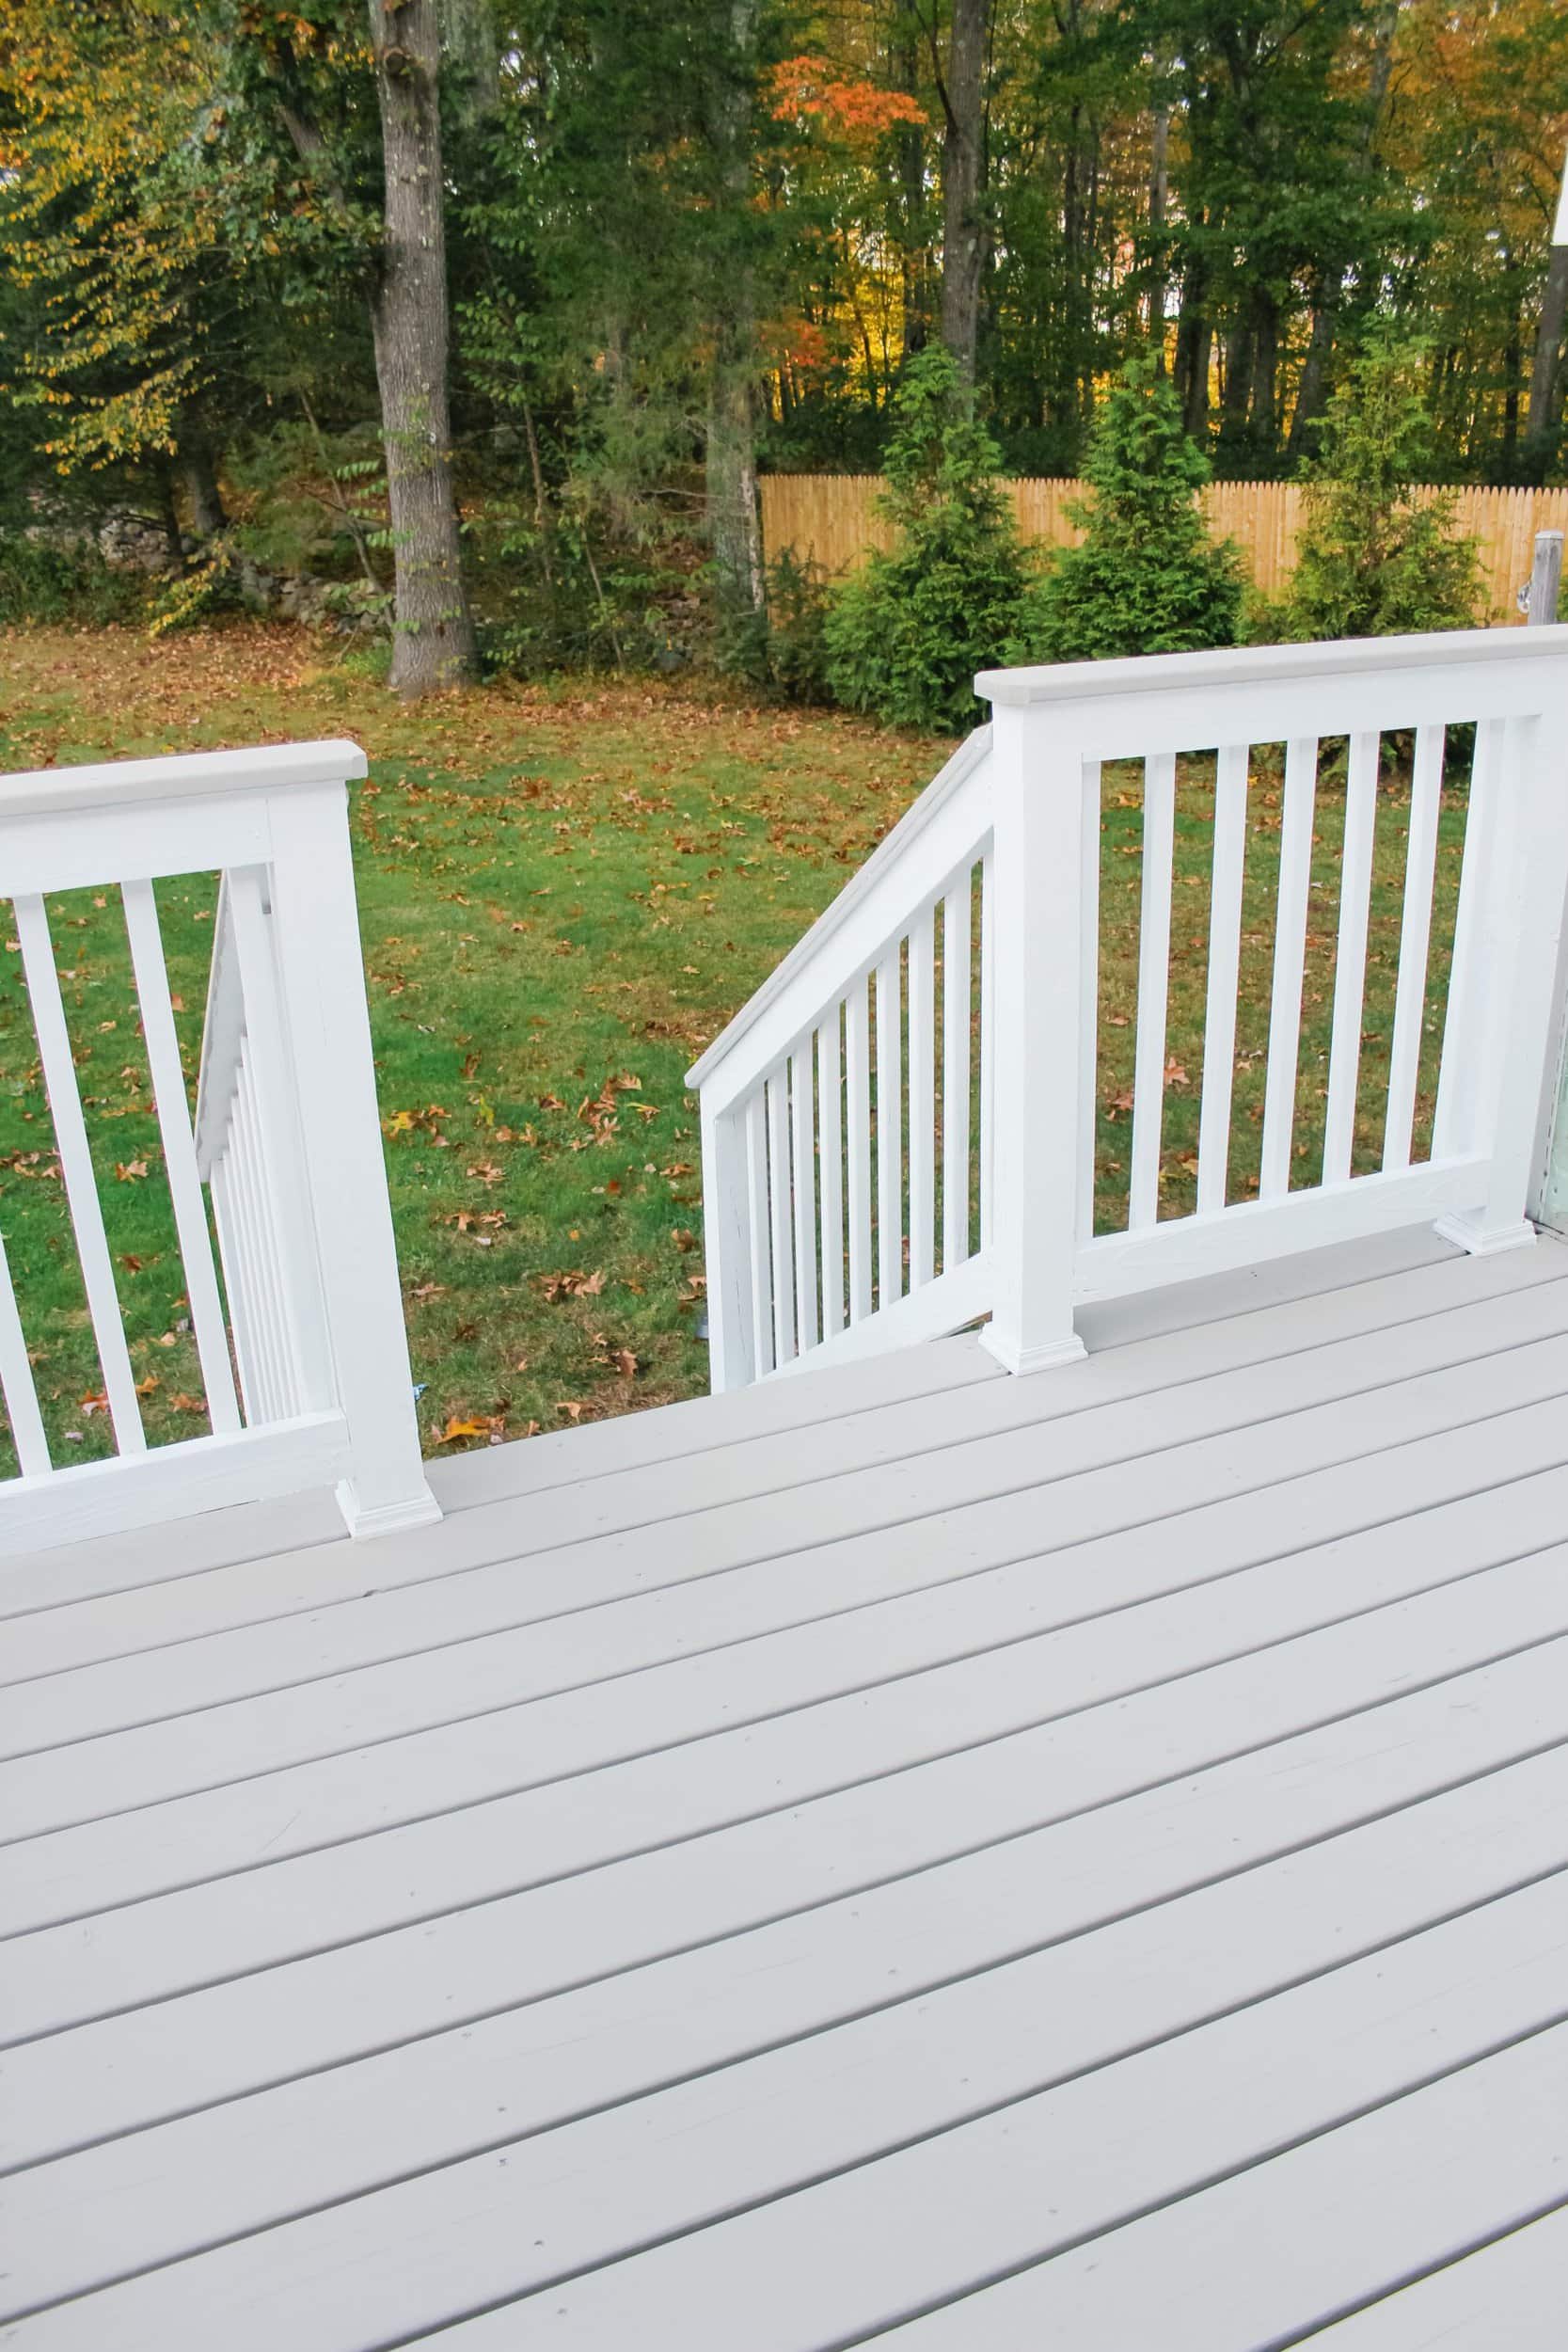 Pressure treated wood deck stained with sherwin williams superdeck in pure white and impossible gray 